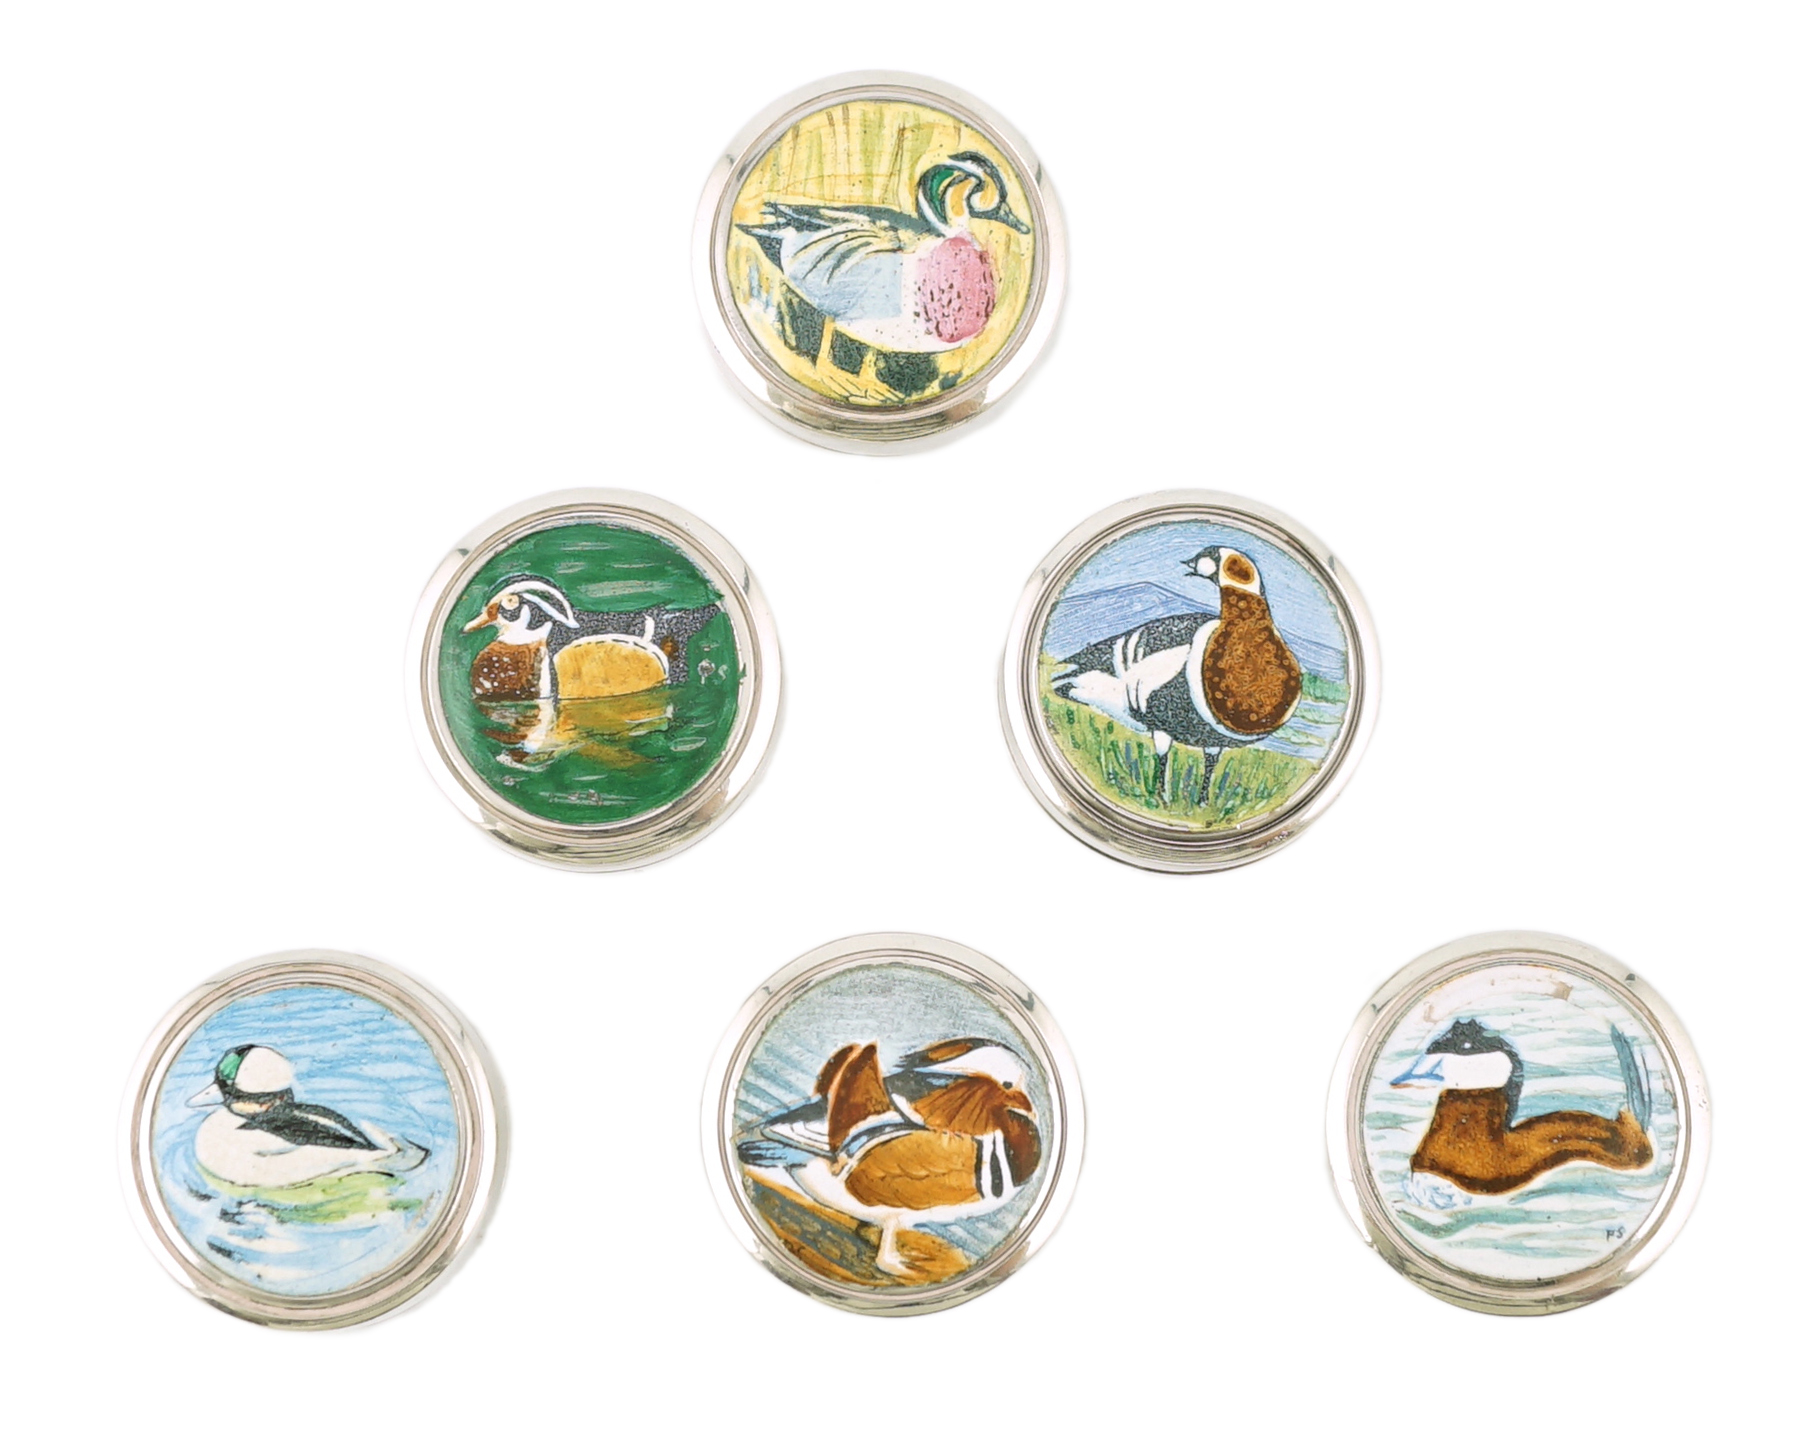 An Elizabeth II set of six limited edition Peter Scott Wildfowl Trust silver and enamel circular pill boxes and covers, by The St James House Company